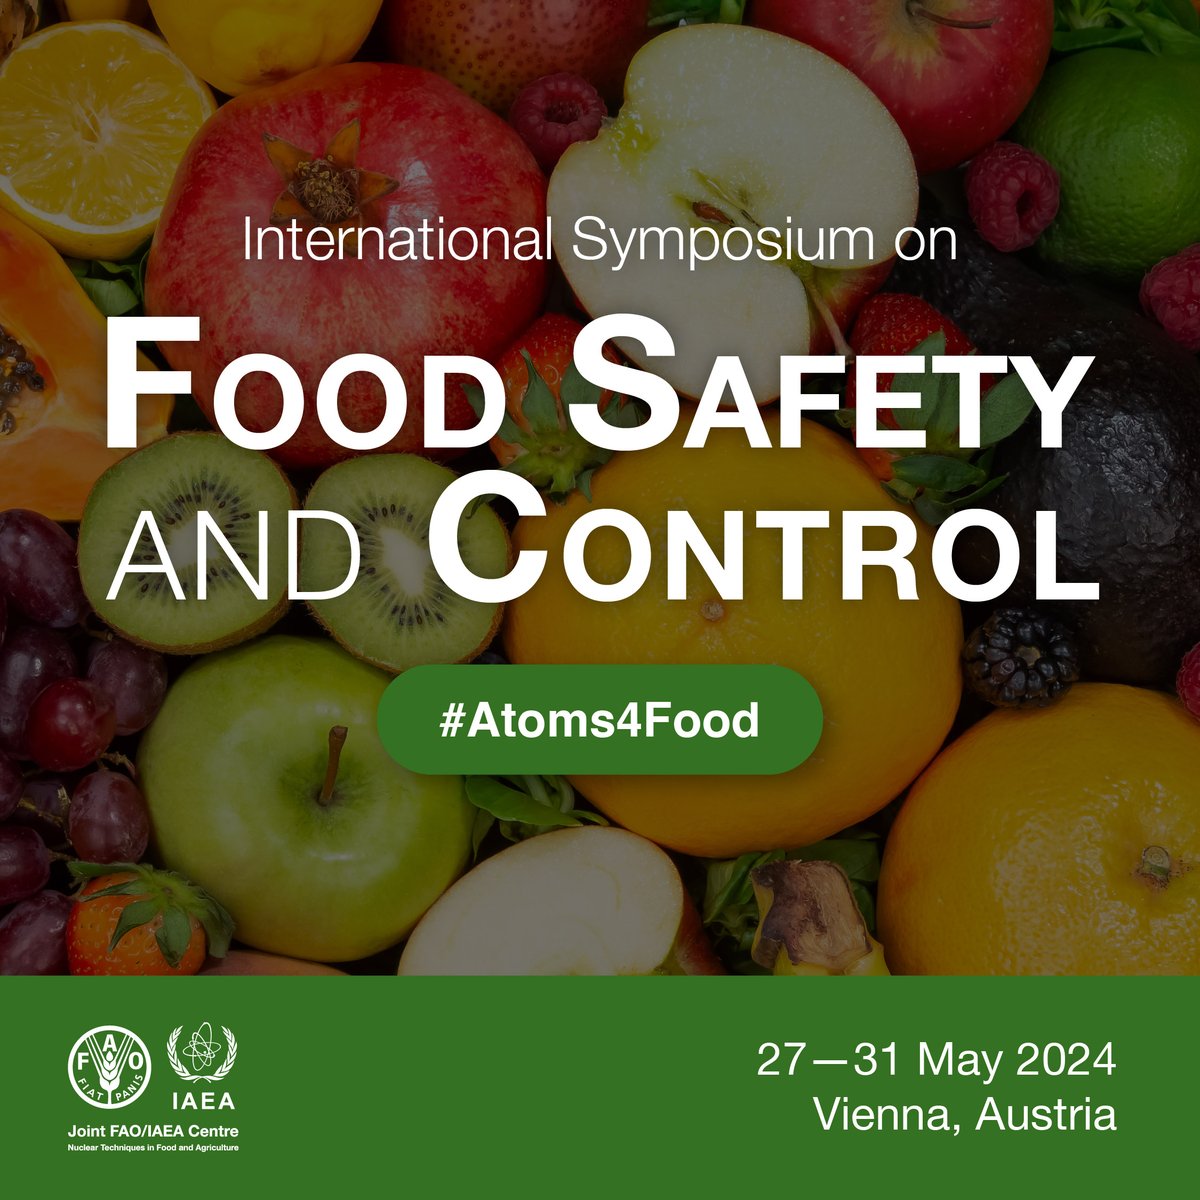 #DidYouKnow that food irradiation prevents food borne diseases with no harm for consumers? Let's explore this topic and more at the upcoming International Symposium on Food Safety and Control. #Atoms4Food 📍 Vienna, Austria 🗓 27–31 May 2024 🔗 atoms.iaea.org/3Ny8MDX